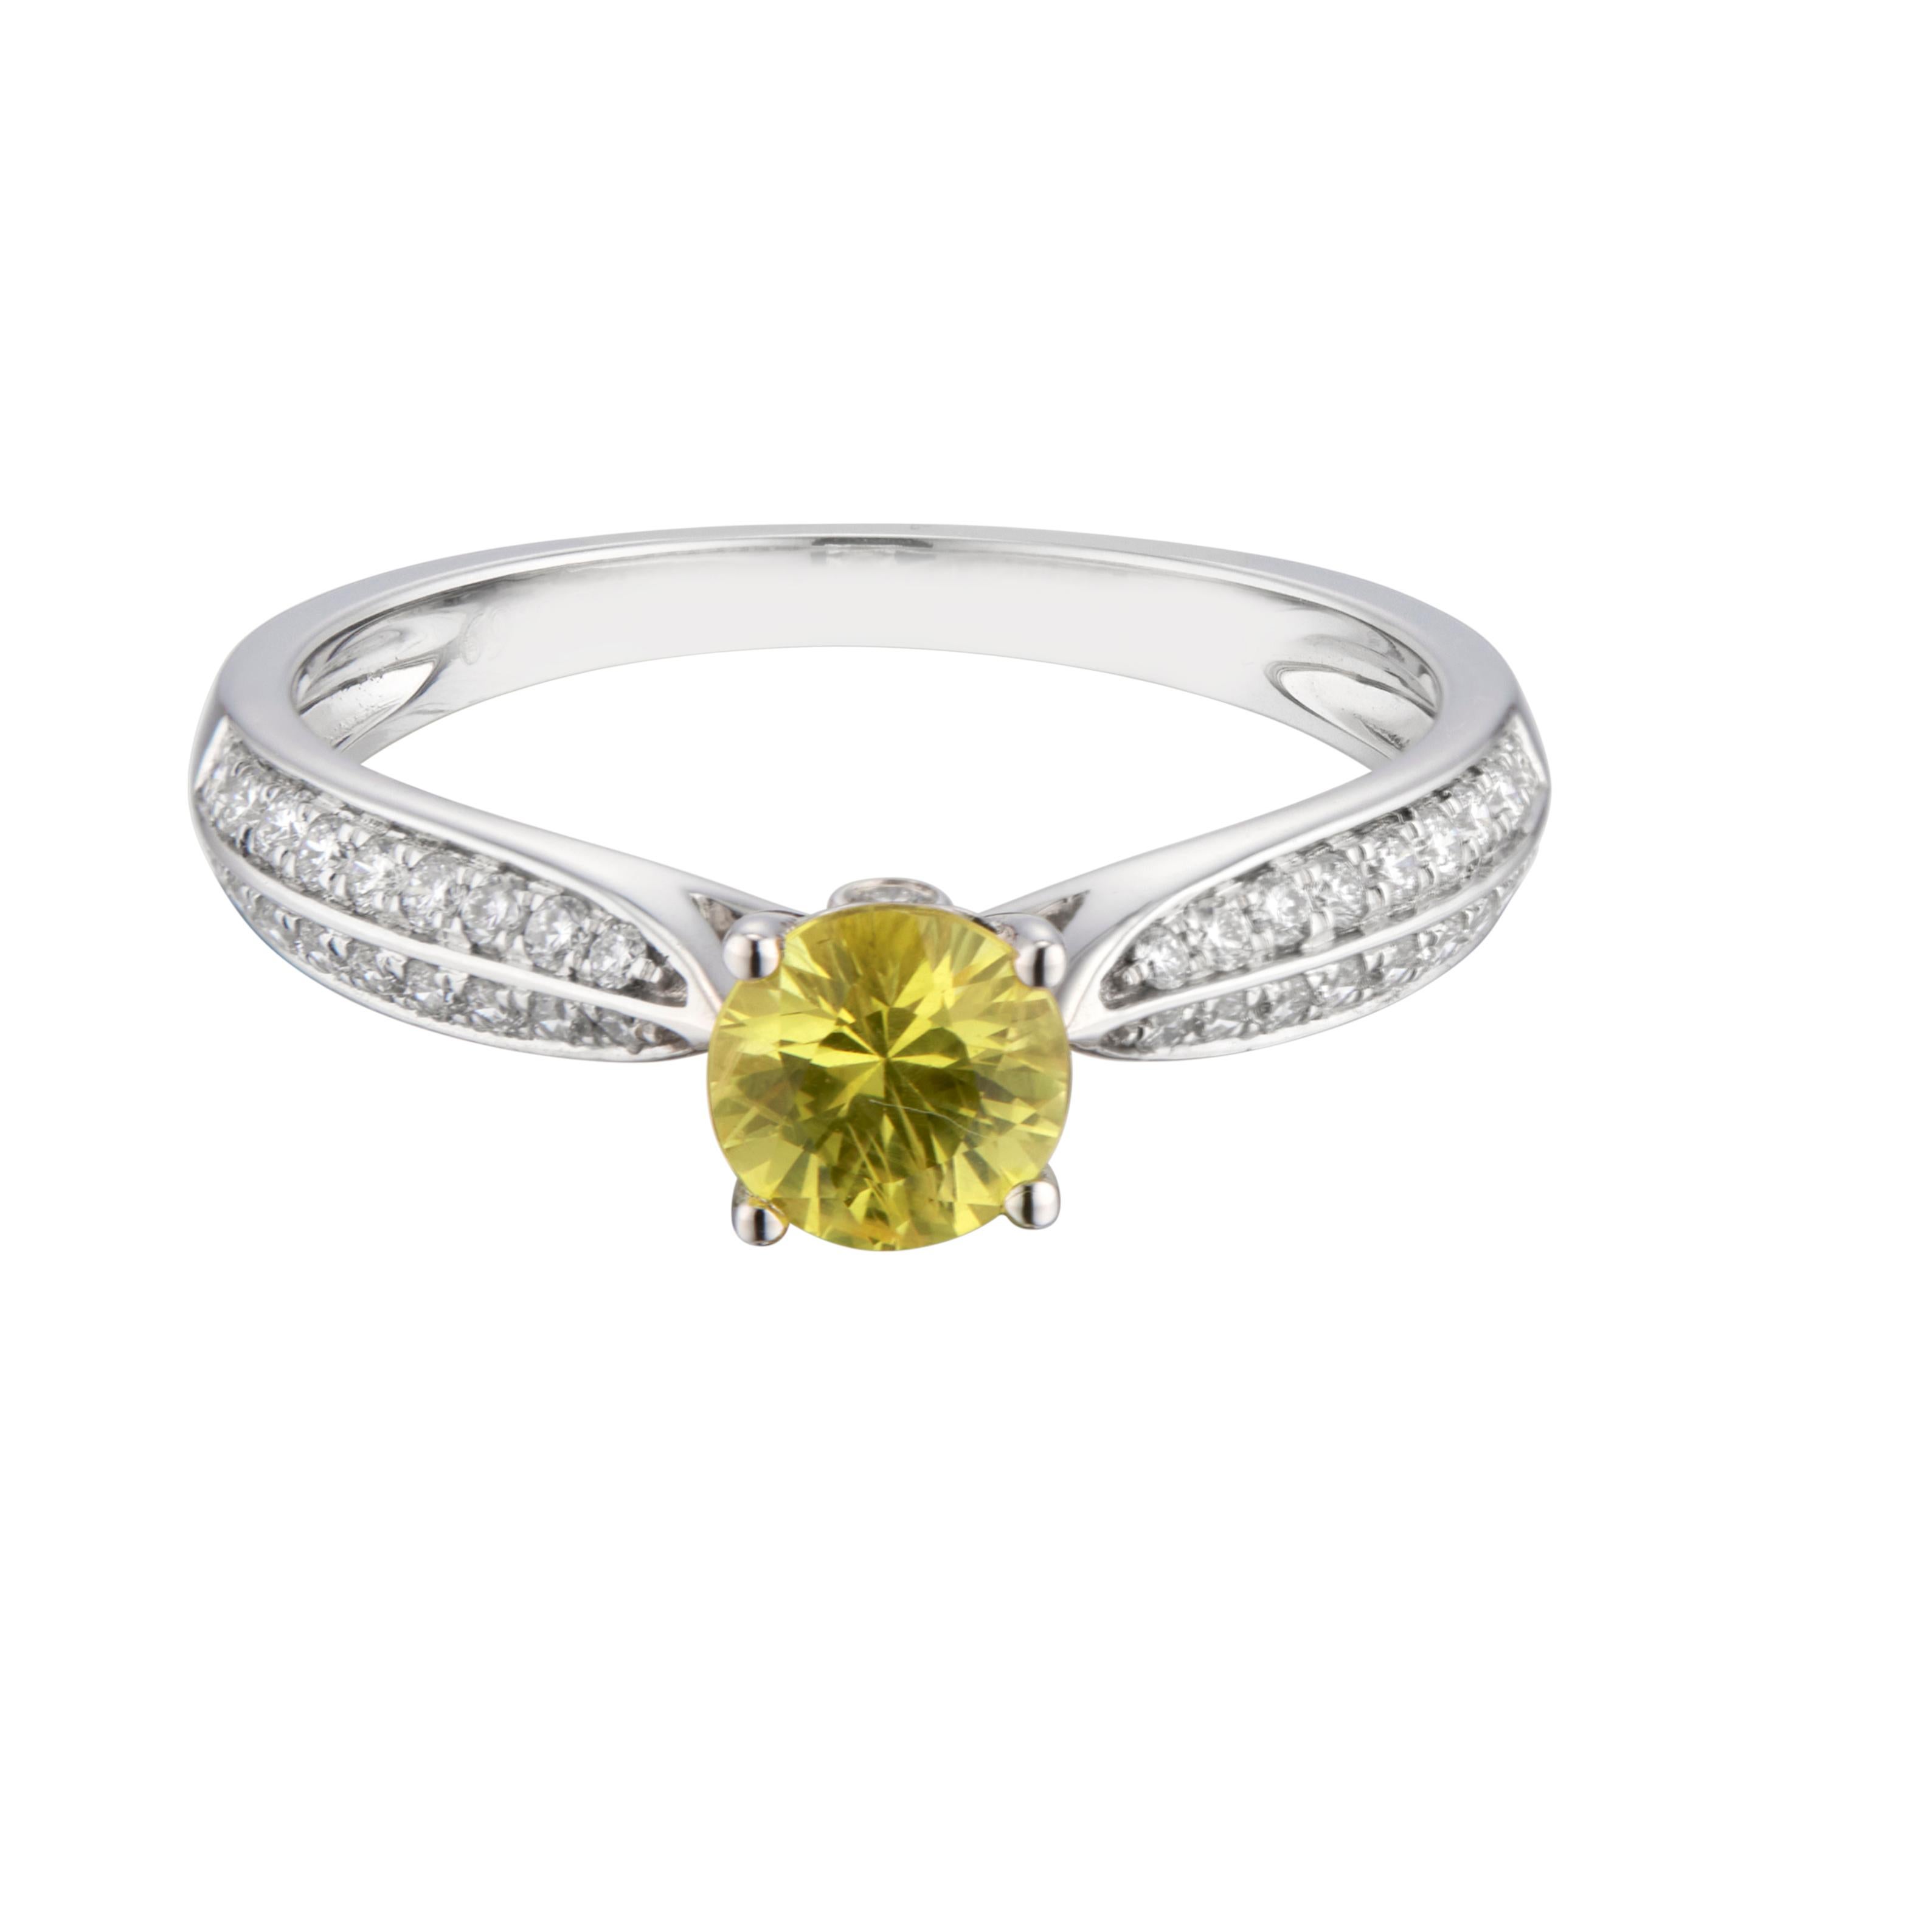 Sapphire and diamond engagement ring. Round yellow sapphire center stone in a 14k white gold solitaire setting with 38 round cut diamonds diamonds along both sides of the shank.

1 round yellow sapphire, approx. .69cts
38 round diamond, G VS-SI